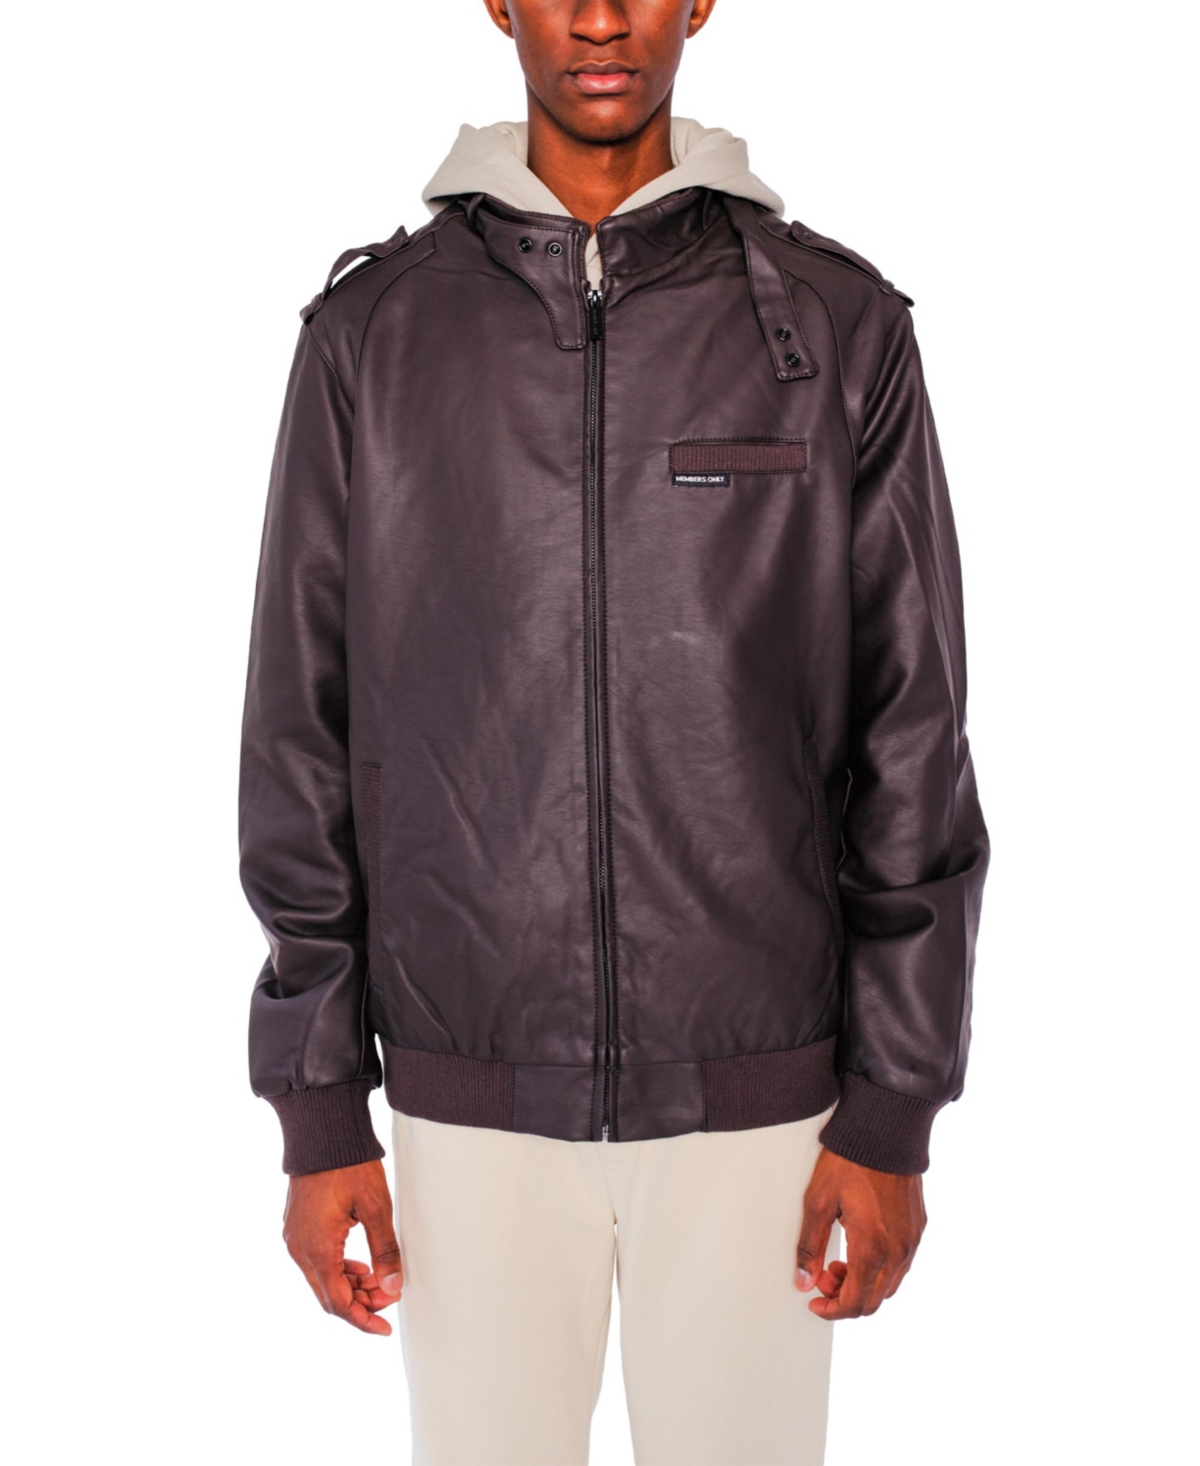 Members Only Men's Big & Tall Faux Leather Iconic Racer Jacket